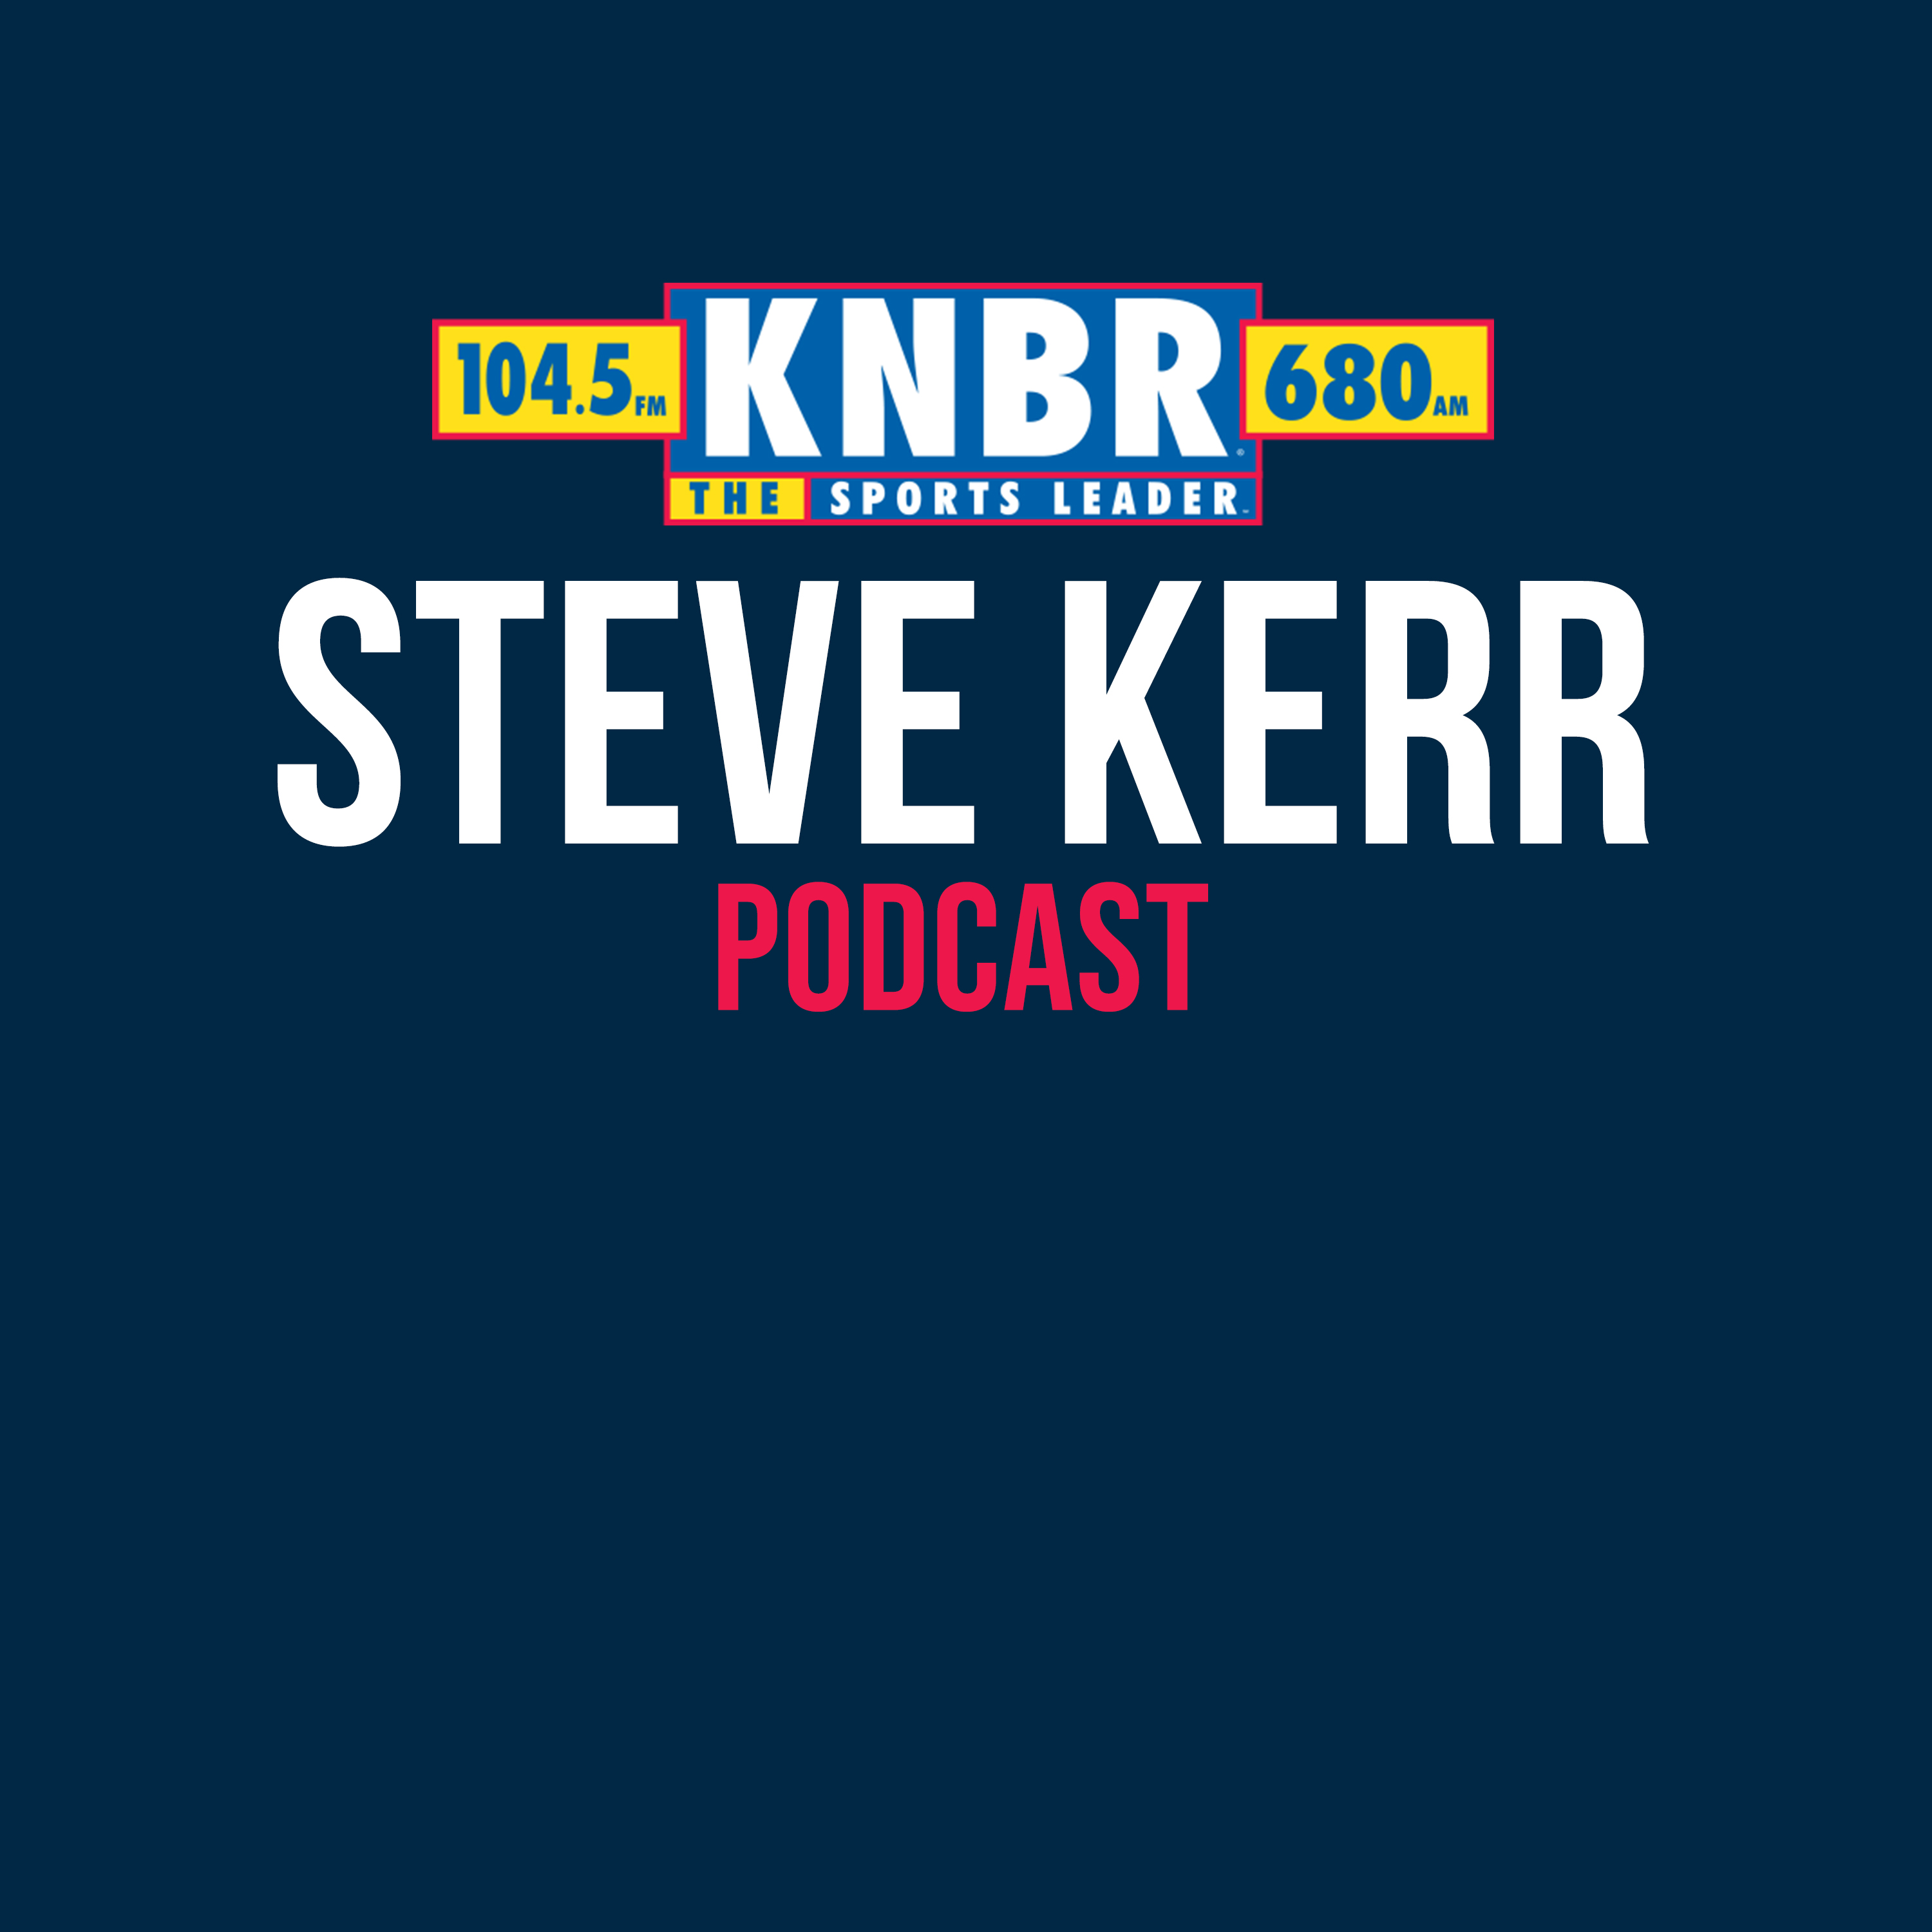 1-26 Steve Kerr discusses how last night was the first time that Klay really looked relaxed out on the court and allowed him to get into rhythm